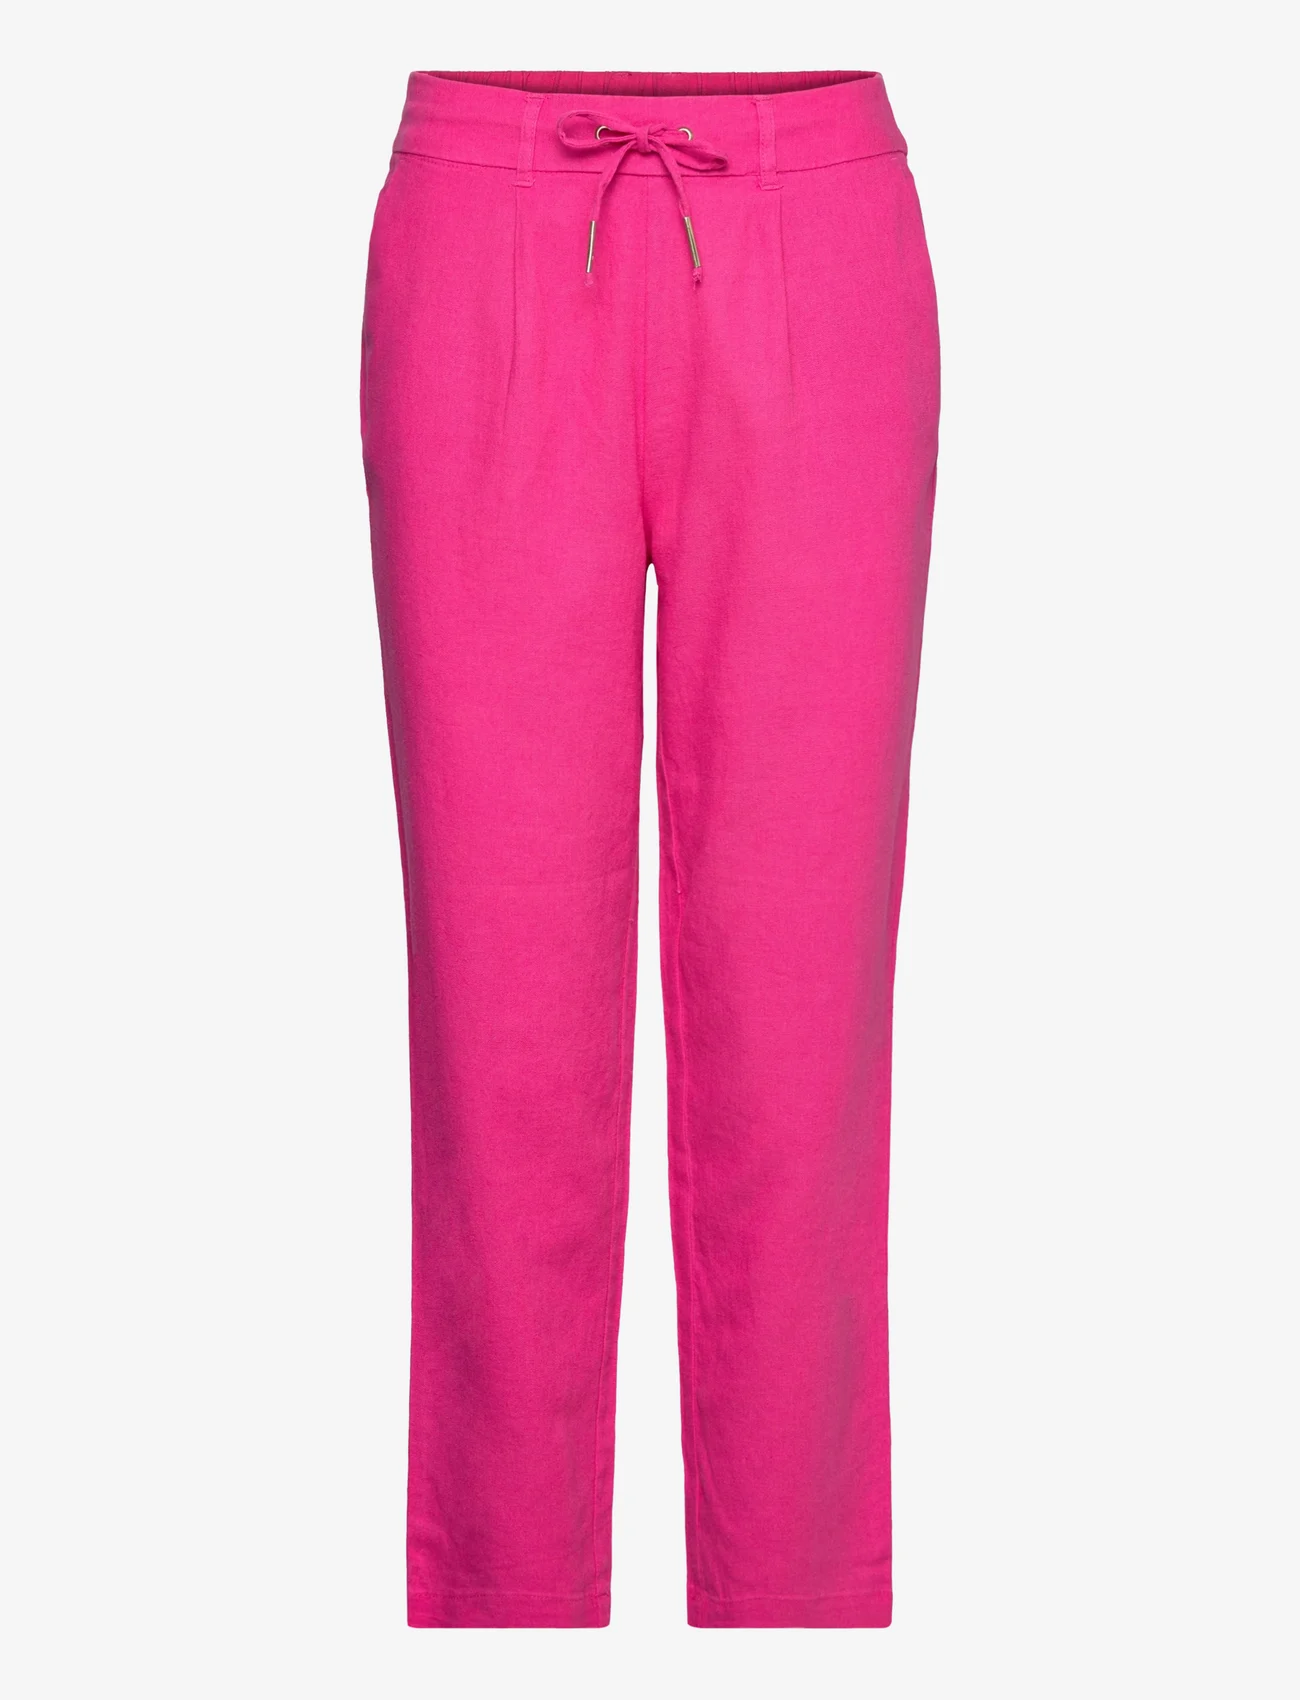 ONLY - ONLCARO-POPTRASH EASY LINEN BL CC PNT - linen trousers - pink yarrow - 0